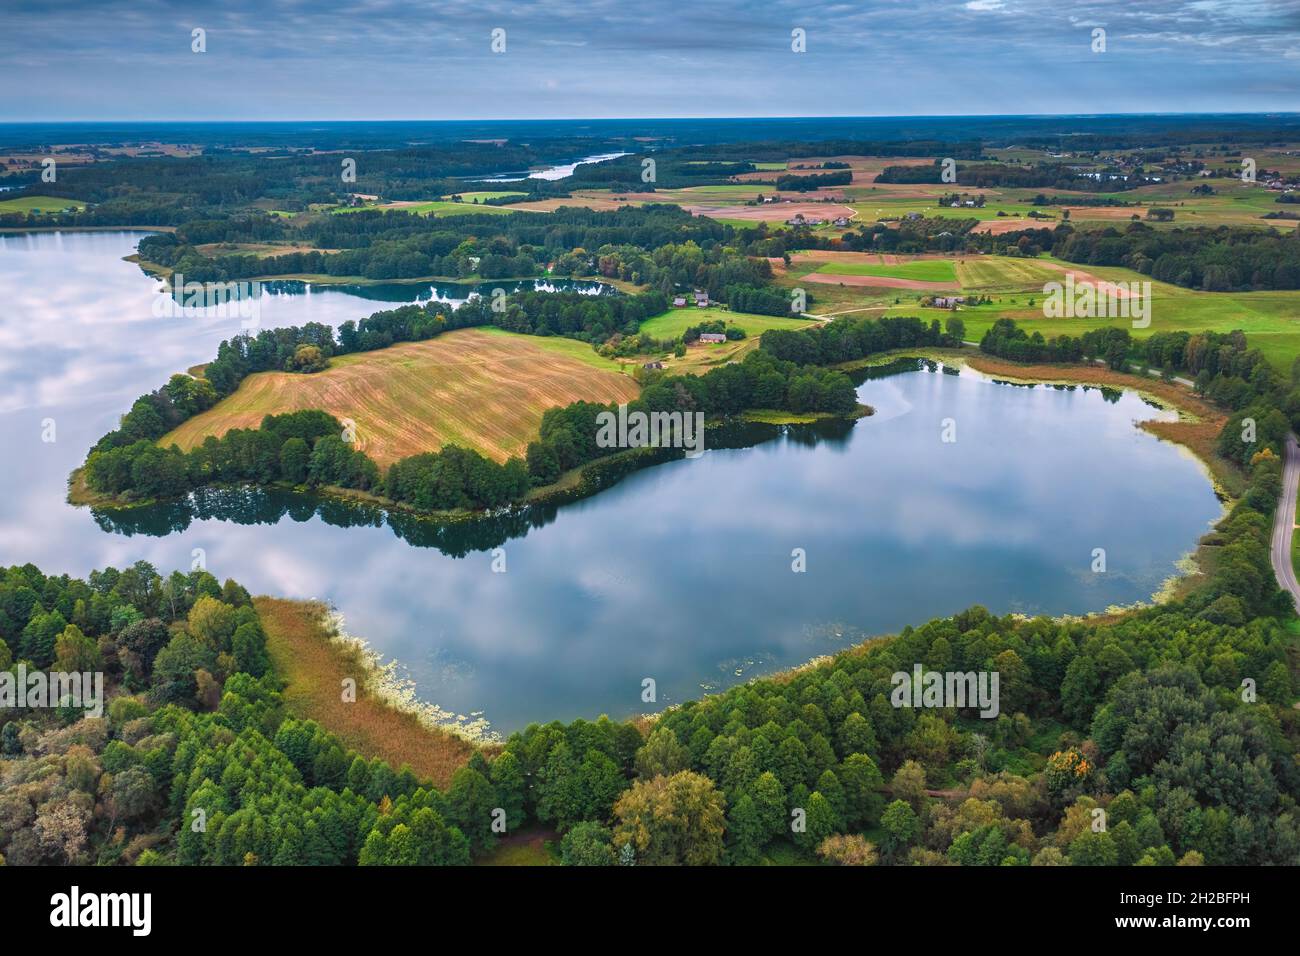 Aerial view of Ancia lake in Lithuania, shiny reflection of sky with clouds in the water of the lake Stock Photo